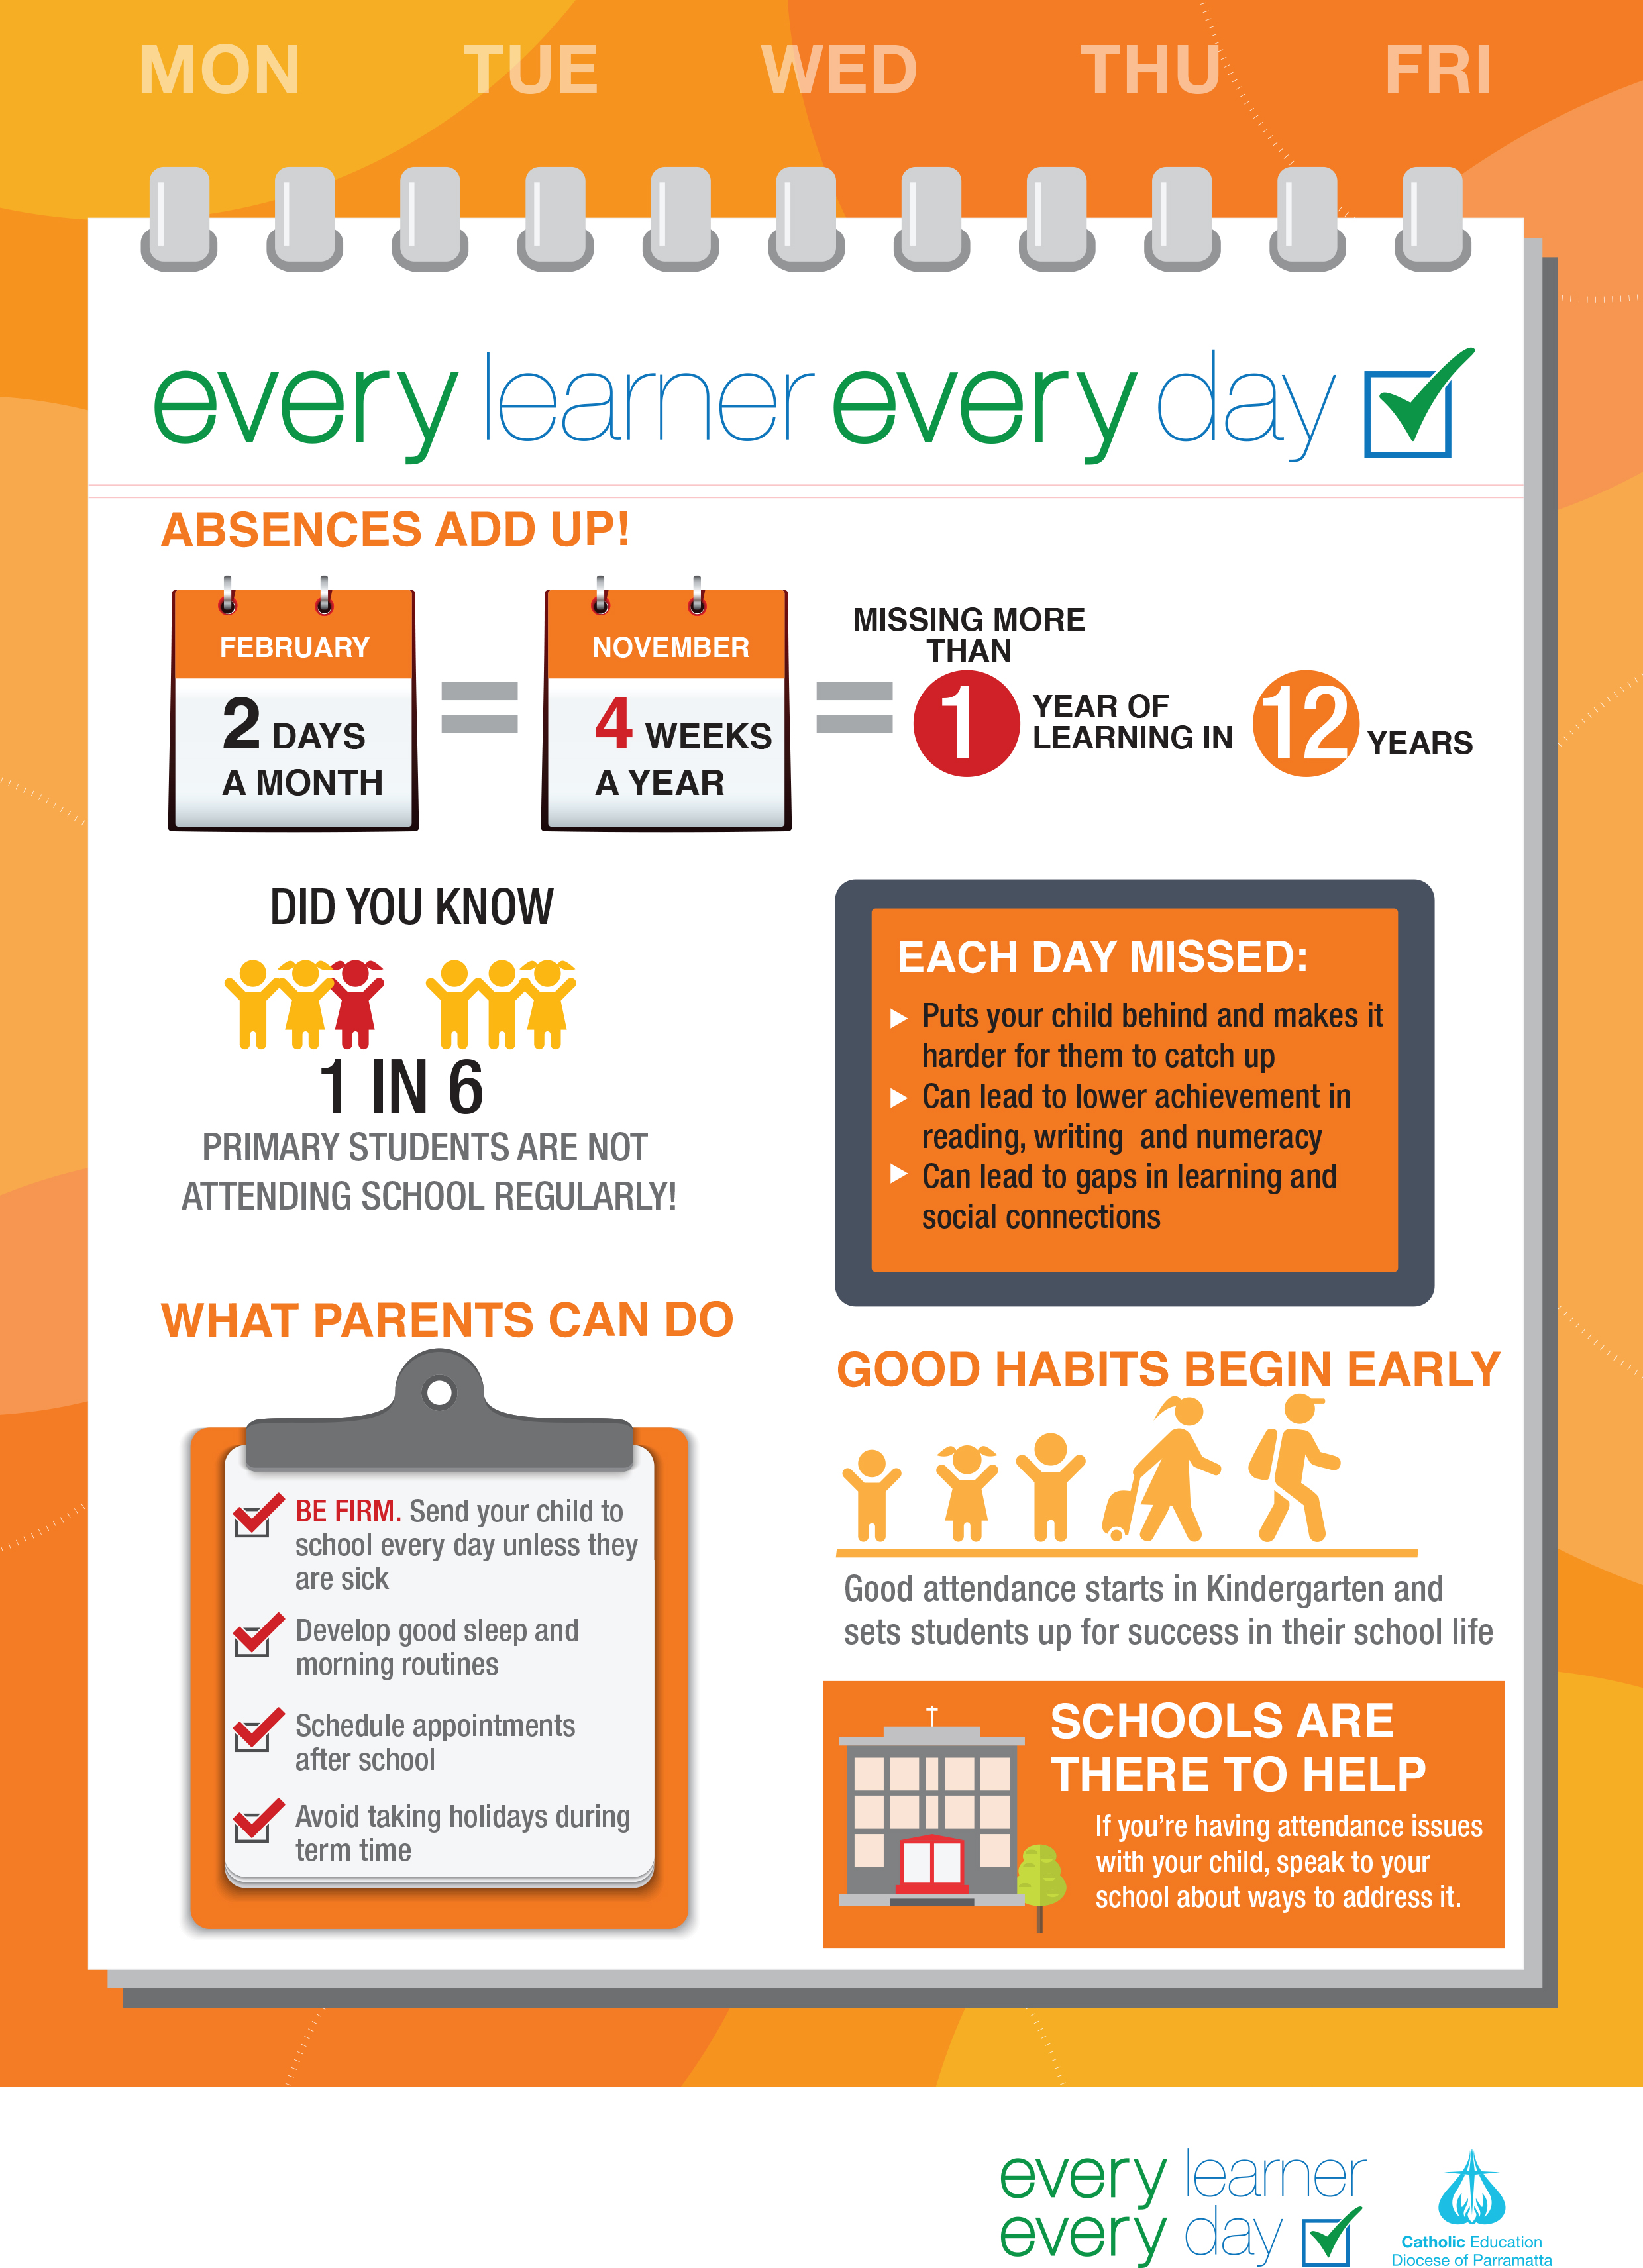 Every Learner Every Day